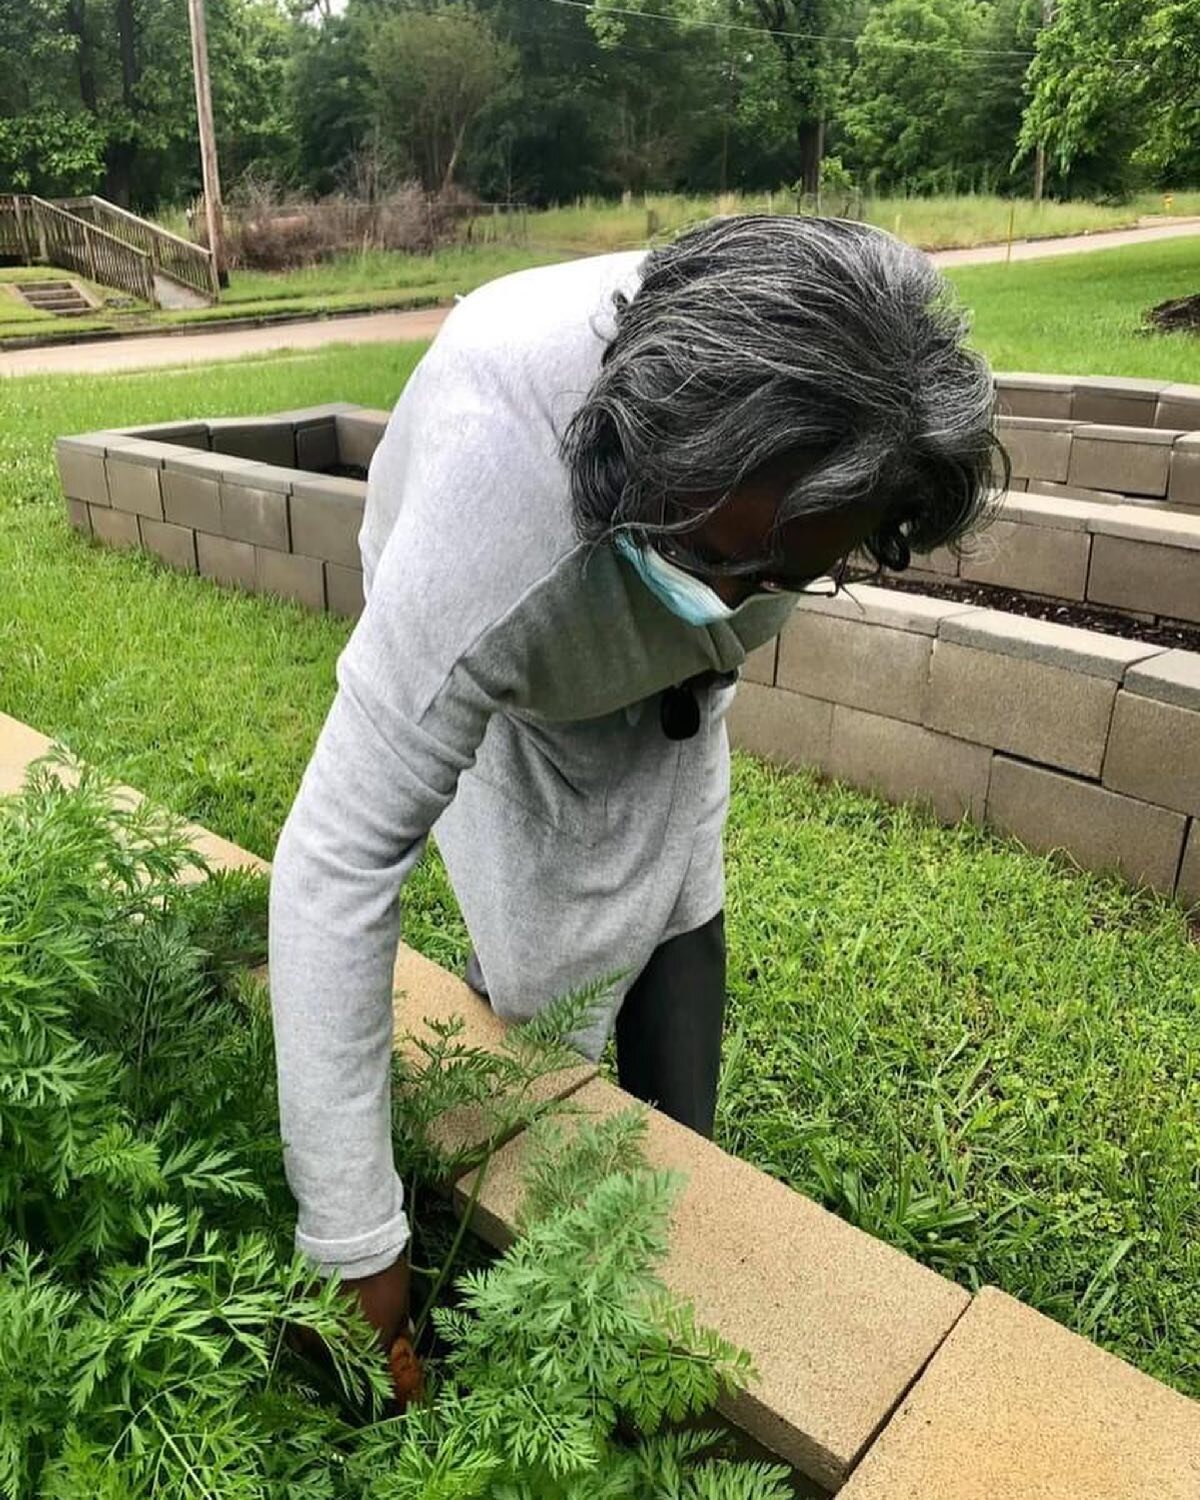 &ldquo;The first time you do a thing is always exciting&rdquo;. - Agatha Christie

Alberta Davis at the St. Rest Baptist Church Community Garden.